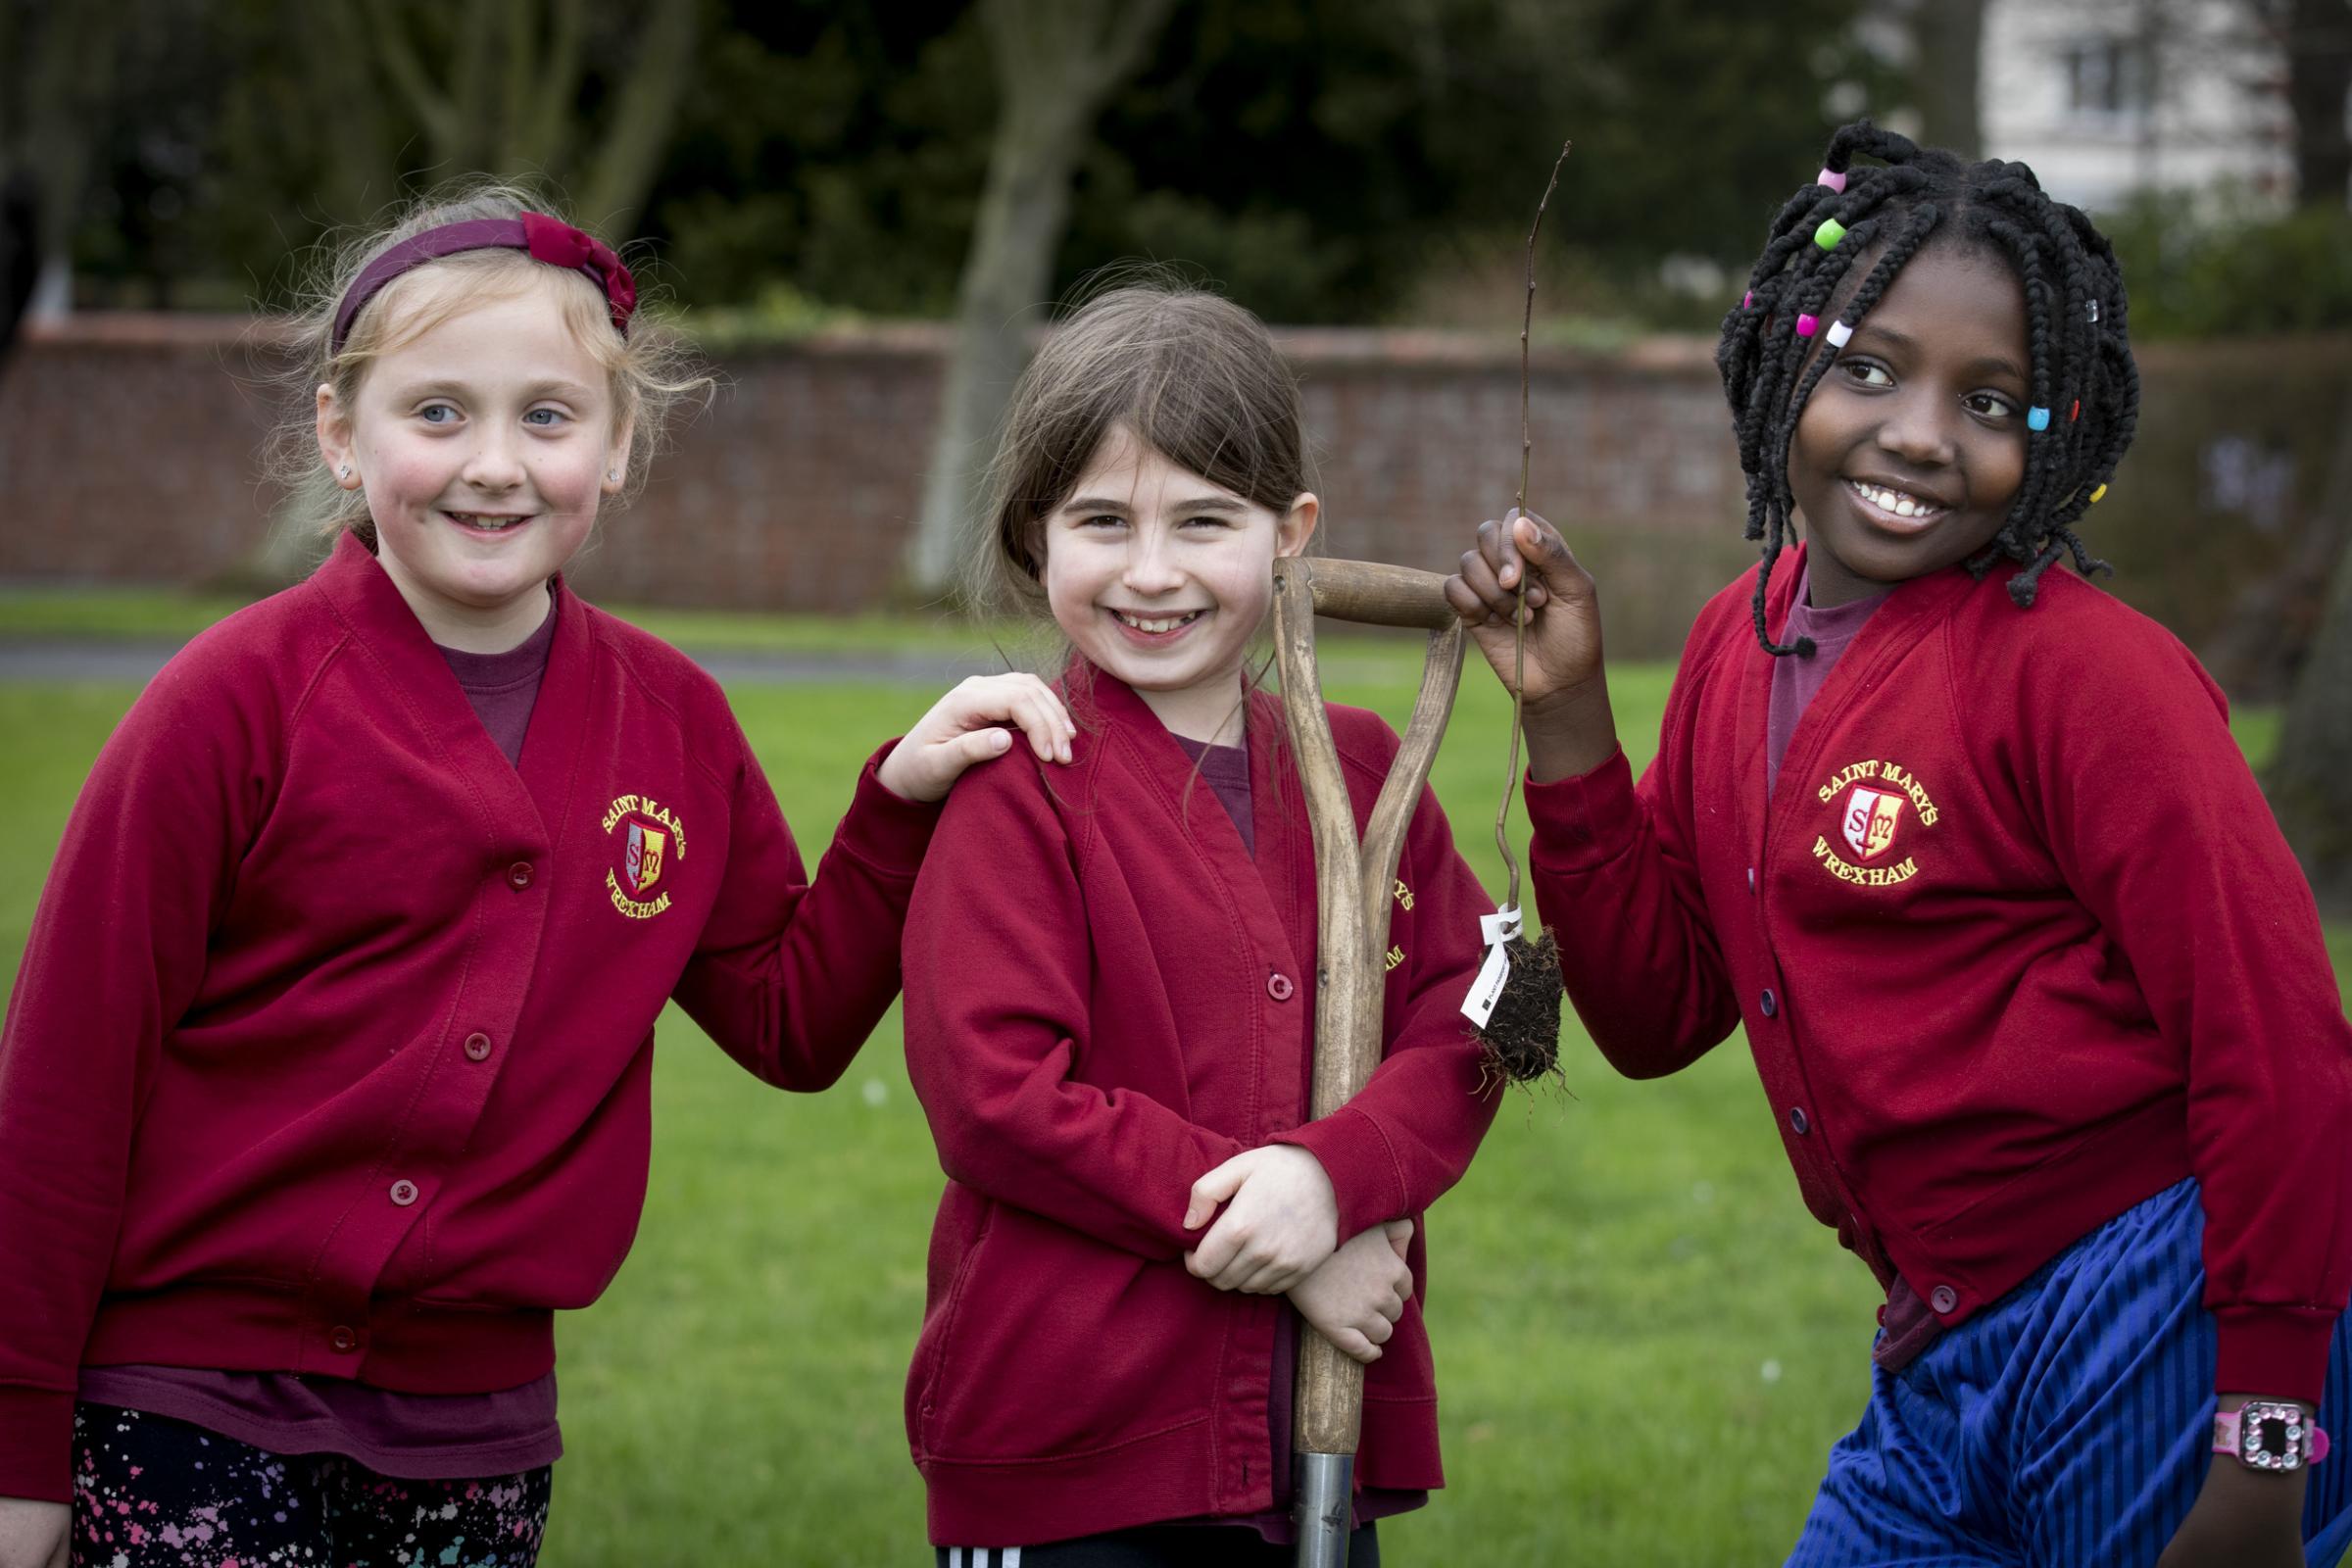 St Marys primary school pupils plant trees with residents of Hillbury and Gwern Alyn, Wrexham. Pupils Evie Shelley, Alexandra Pereira and Sabrina Kiao. Picture Mandy Jones